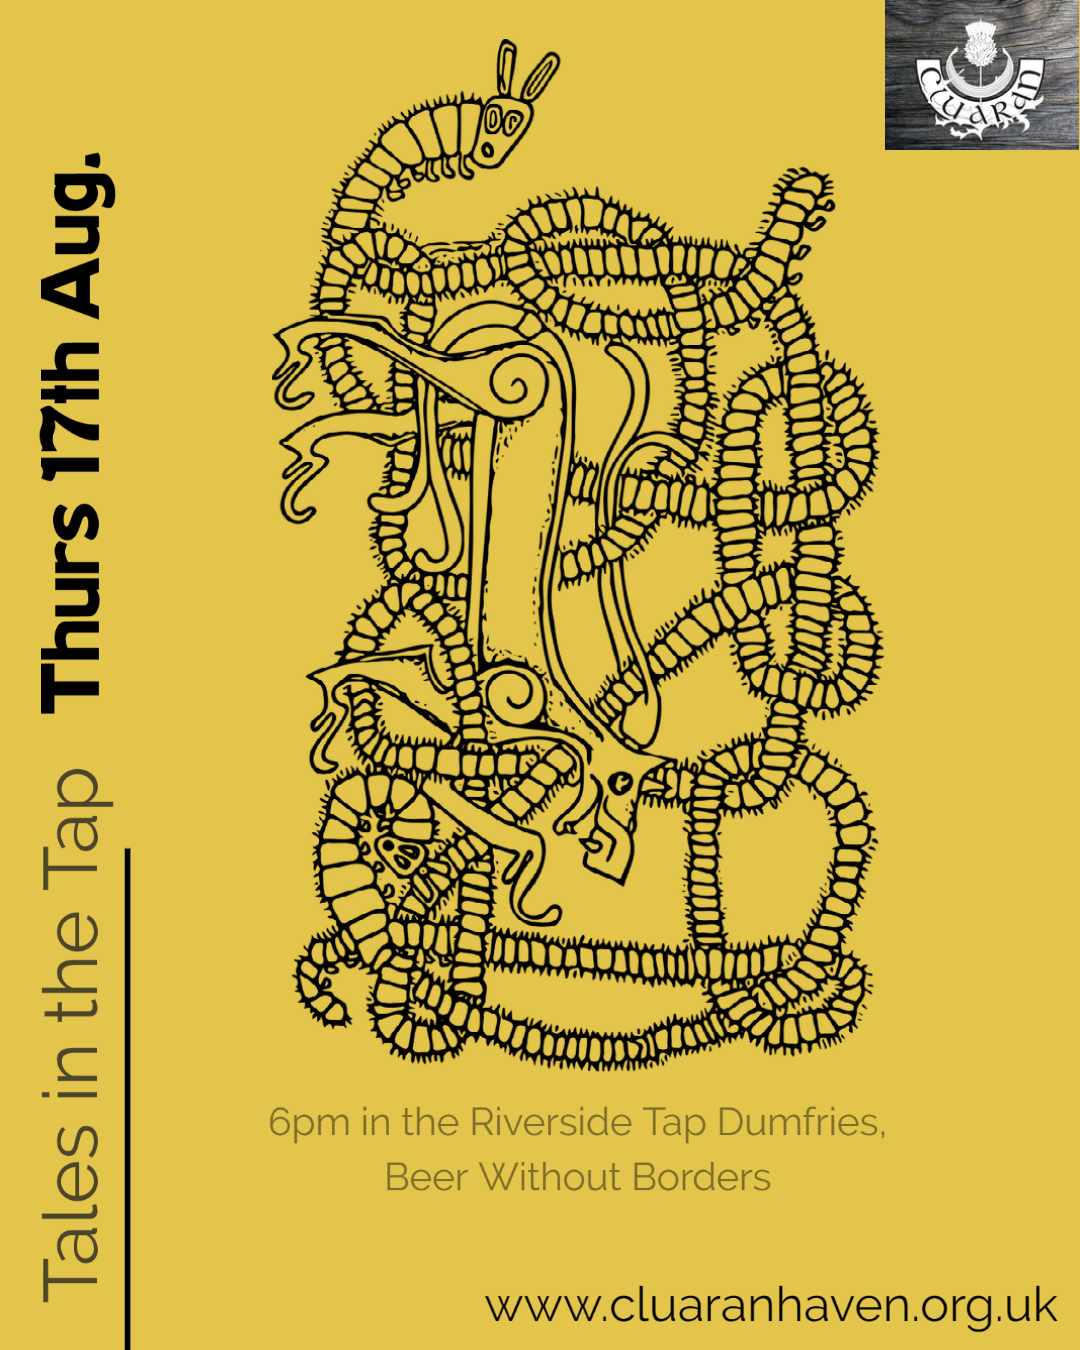 Tales at the tap, 6pm on Thursday the 17th of August in the riverside tap, Dumfries